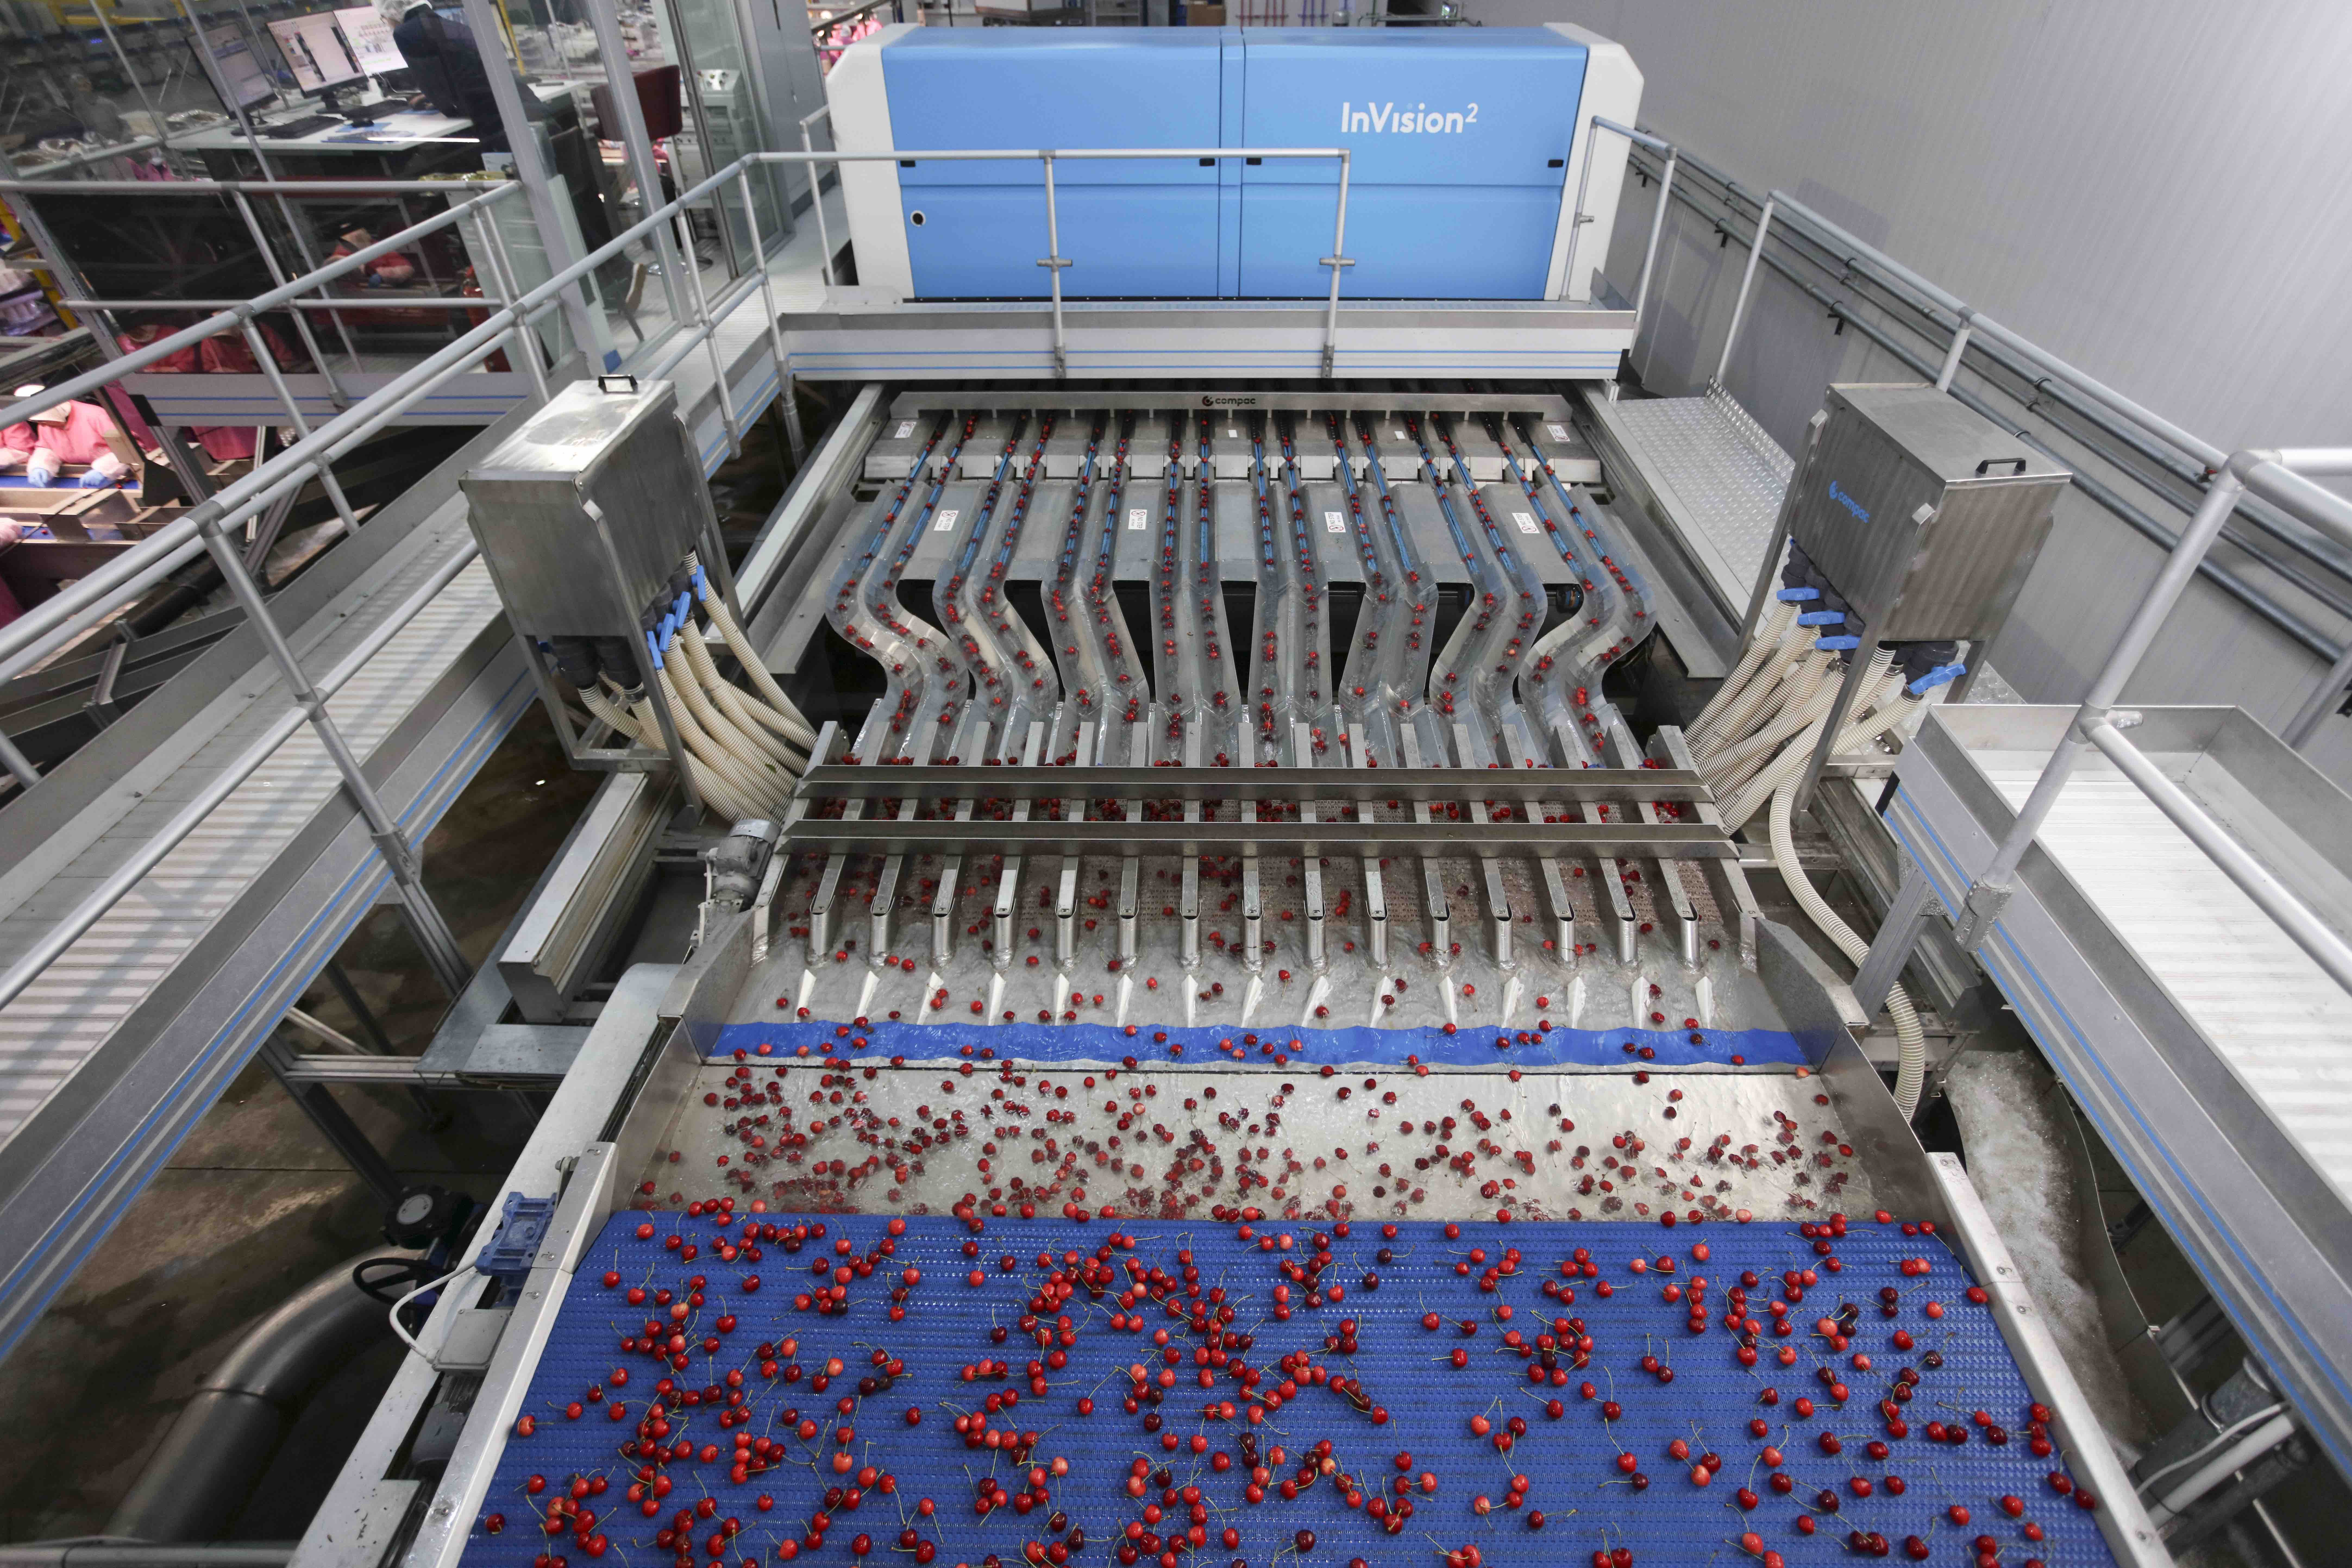 PERLA FRUIT SET TO BECOME TURKIYE’S LEADING CHERRY EXPORTER USING TOMRA FOOD SORTING AND GRADING SOLUTIONS